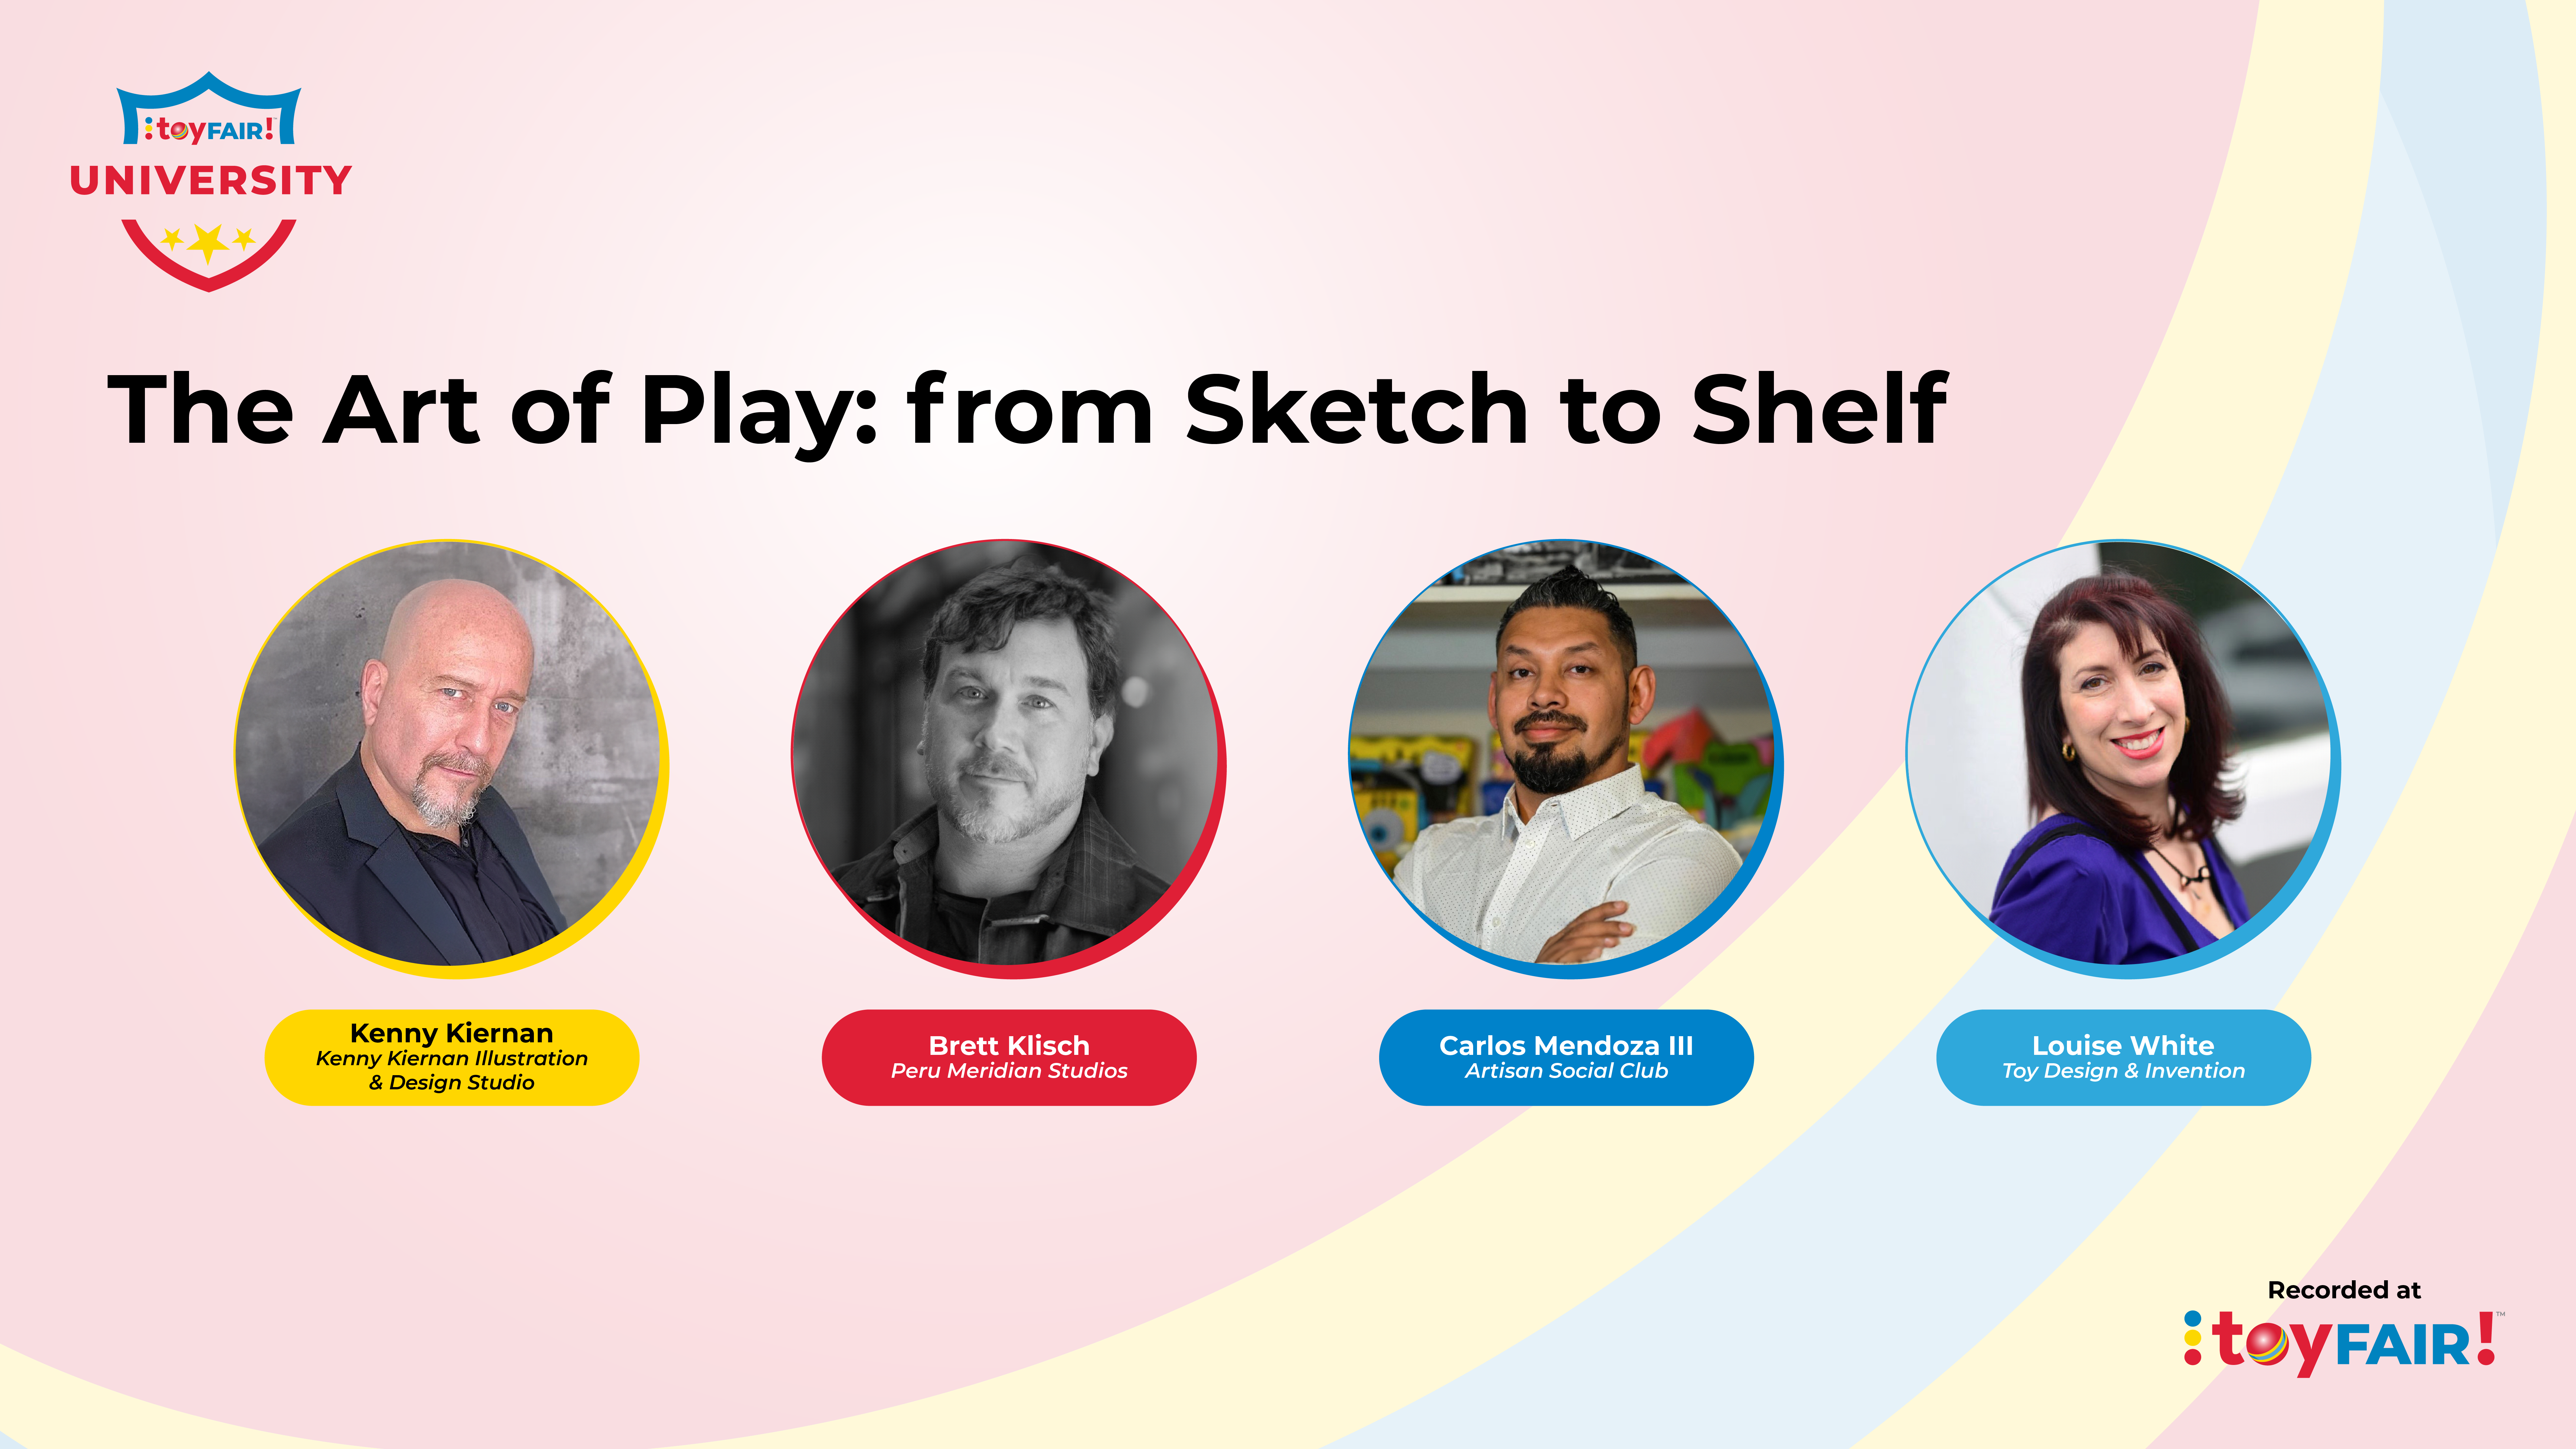 The Art of Play: from Sketch to Shelf